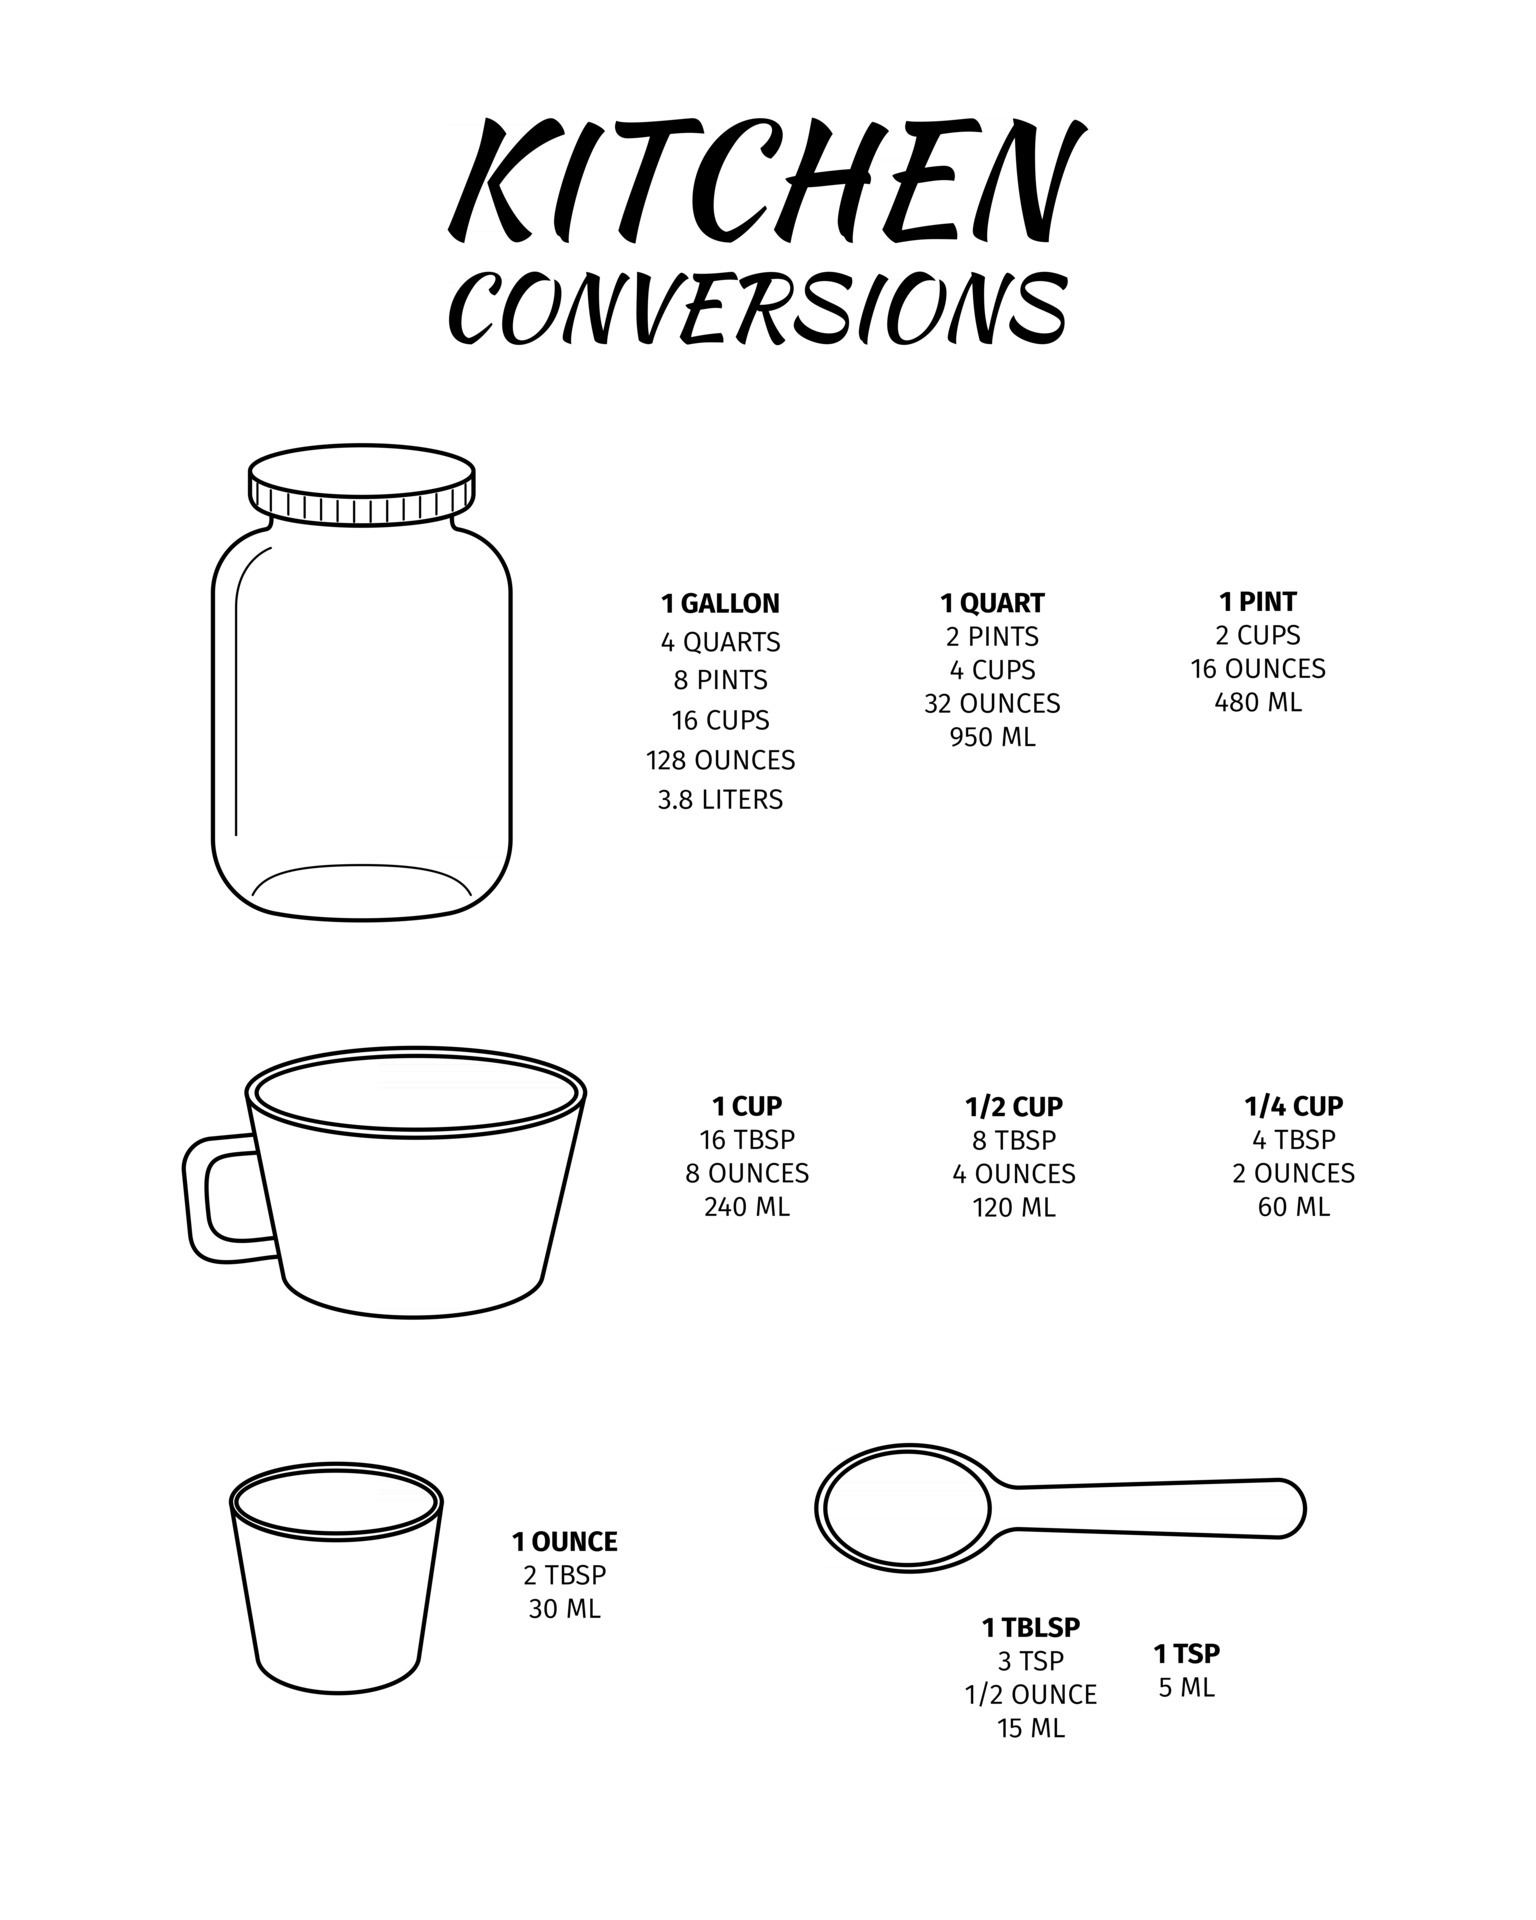 https://static.vecteezy.com/system/resources/previews/005/235/063/original/kitchen-conversions-chart-with-jar-cup-ounce-glass-spoon-basic-metric-units-of-cooking-measurements-most-commonly-used-volume-measures-weight-of-liquids-free-vector.jpg